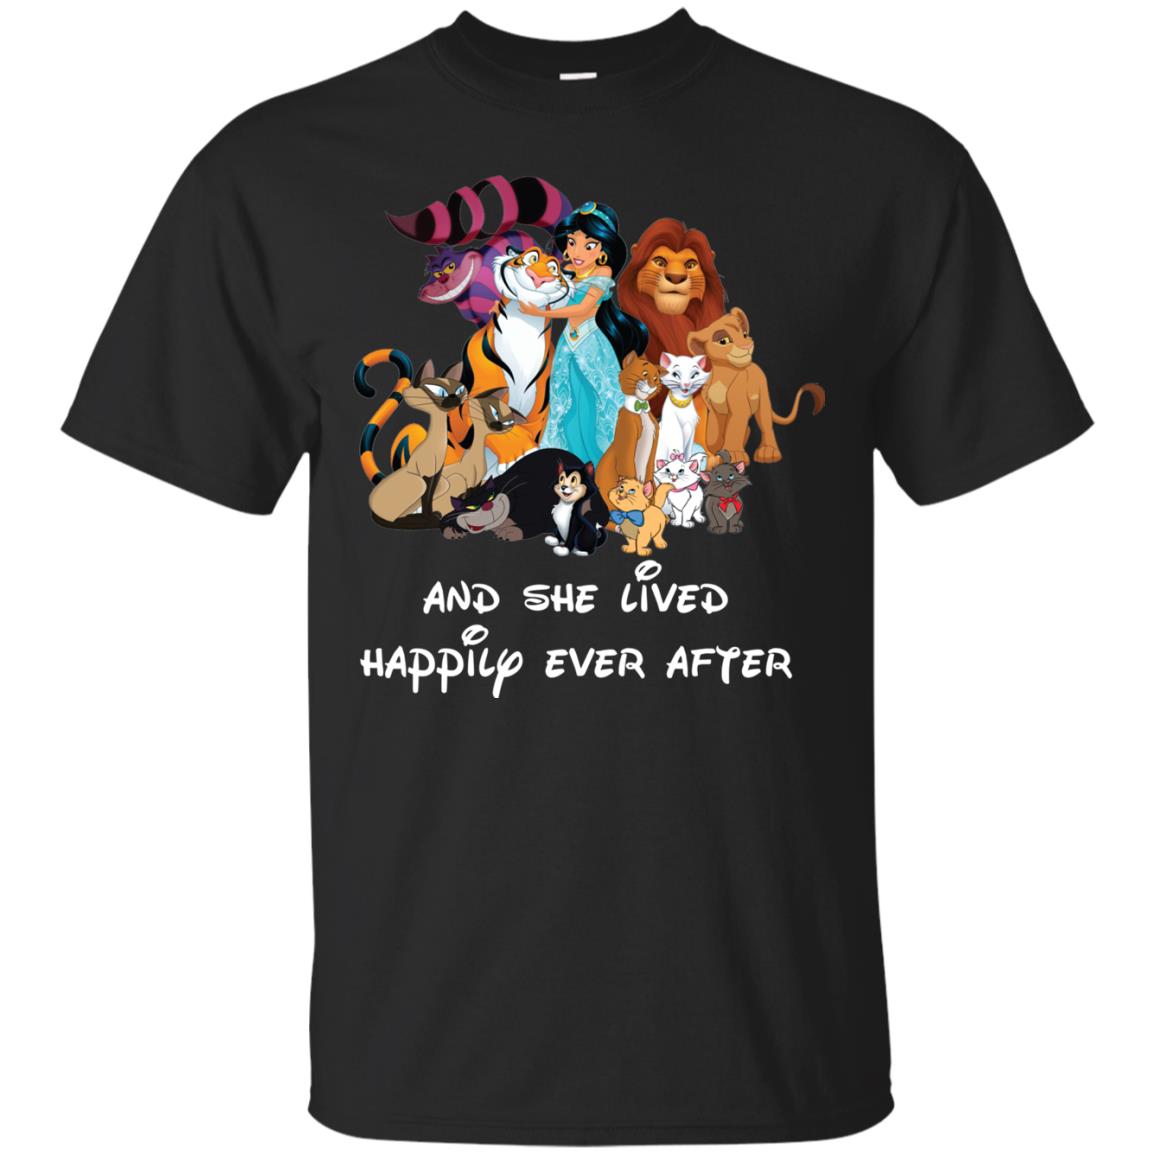 Disney shirt: And she lived happily ever after t shirt